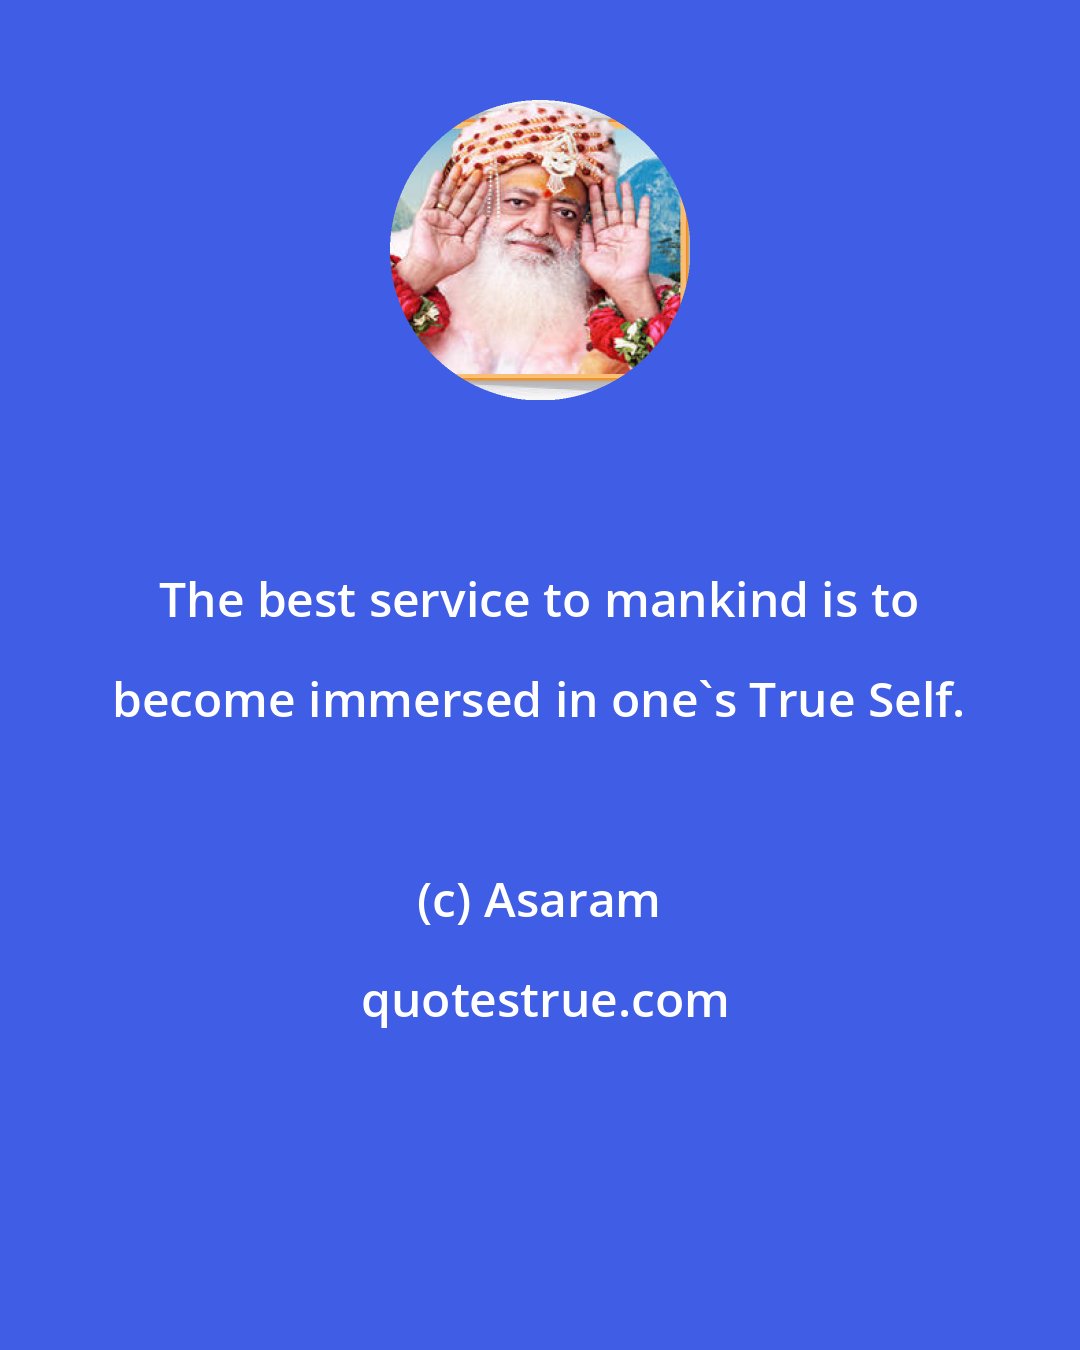 Asaram: The best service to mankind is to become immersed in one's True Self.